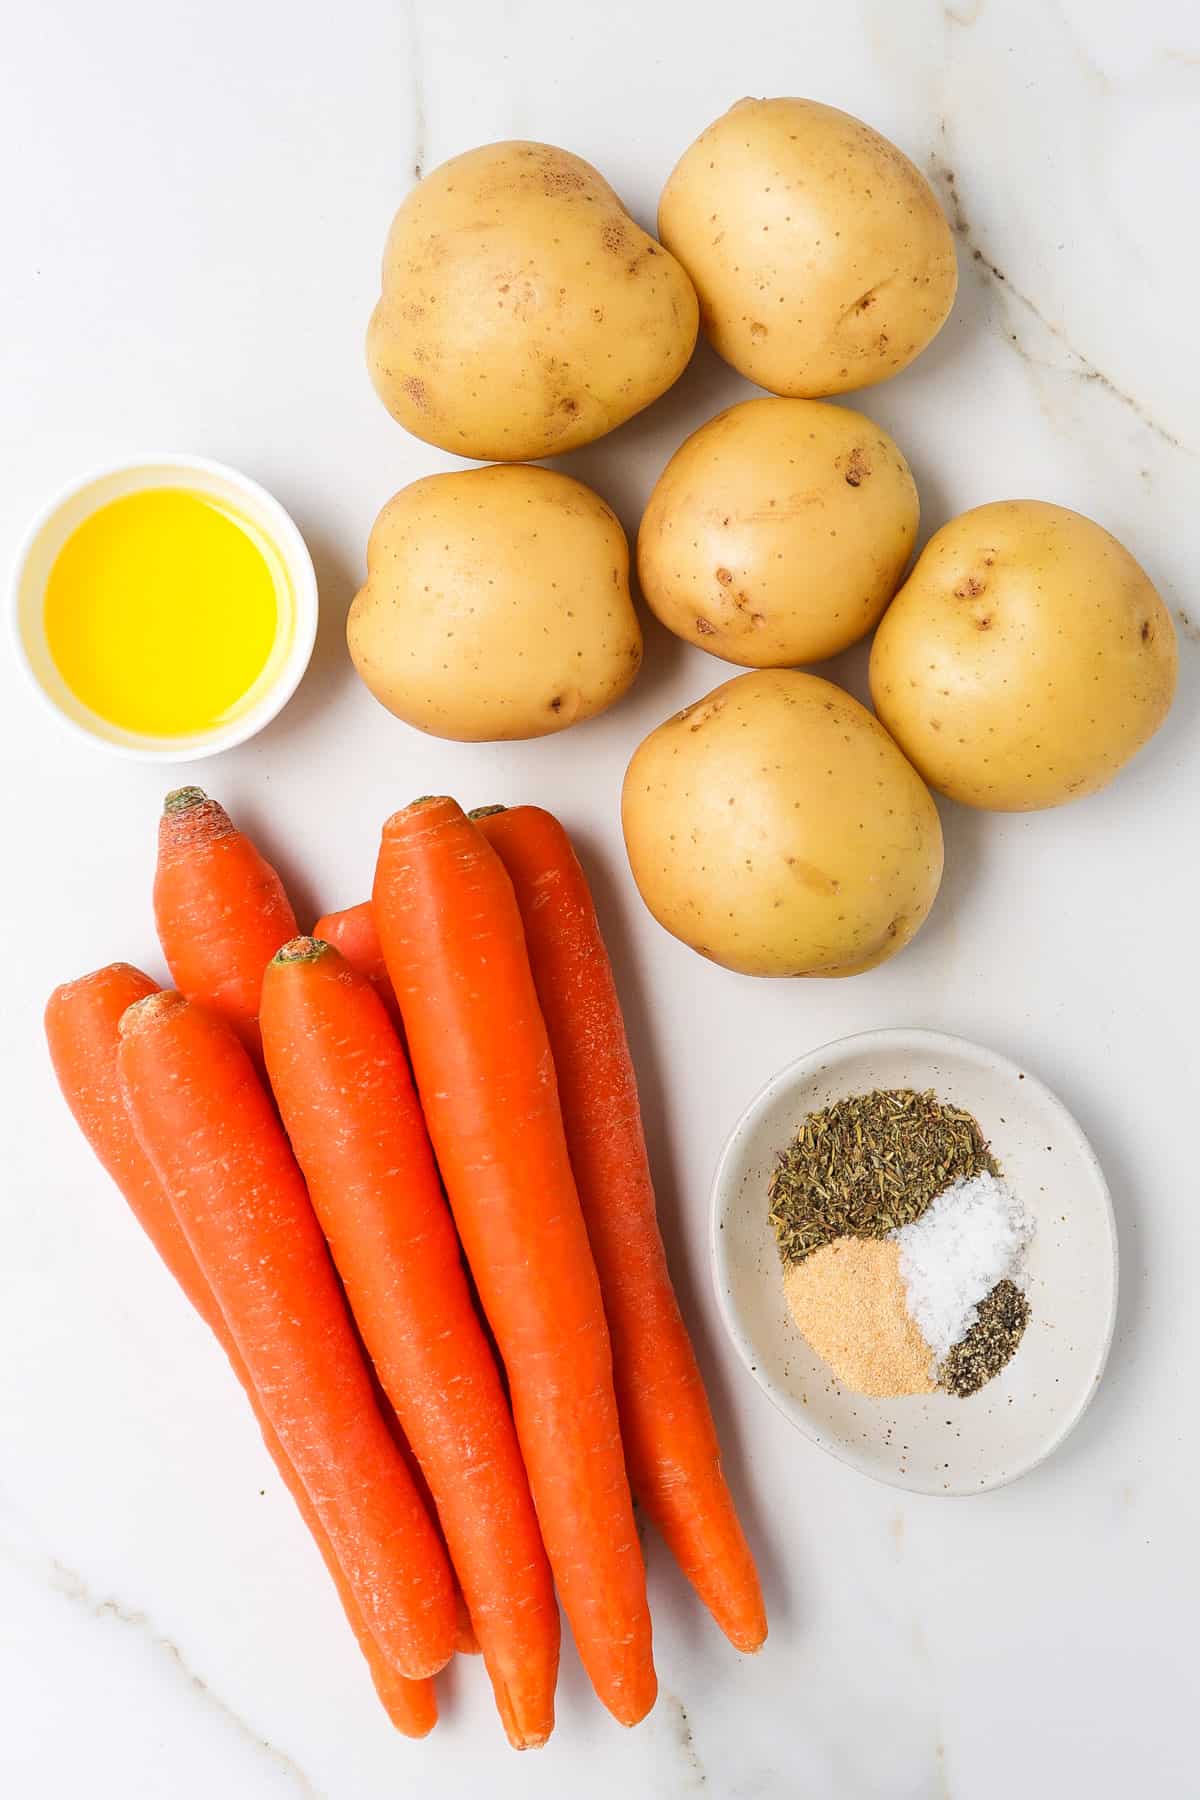 Ingredients needed to make air fried potatoes and carrots.